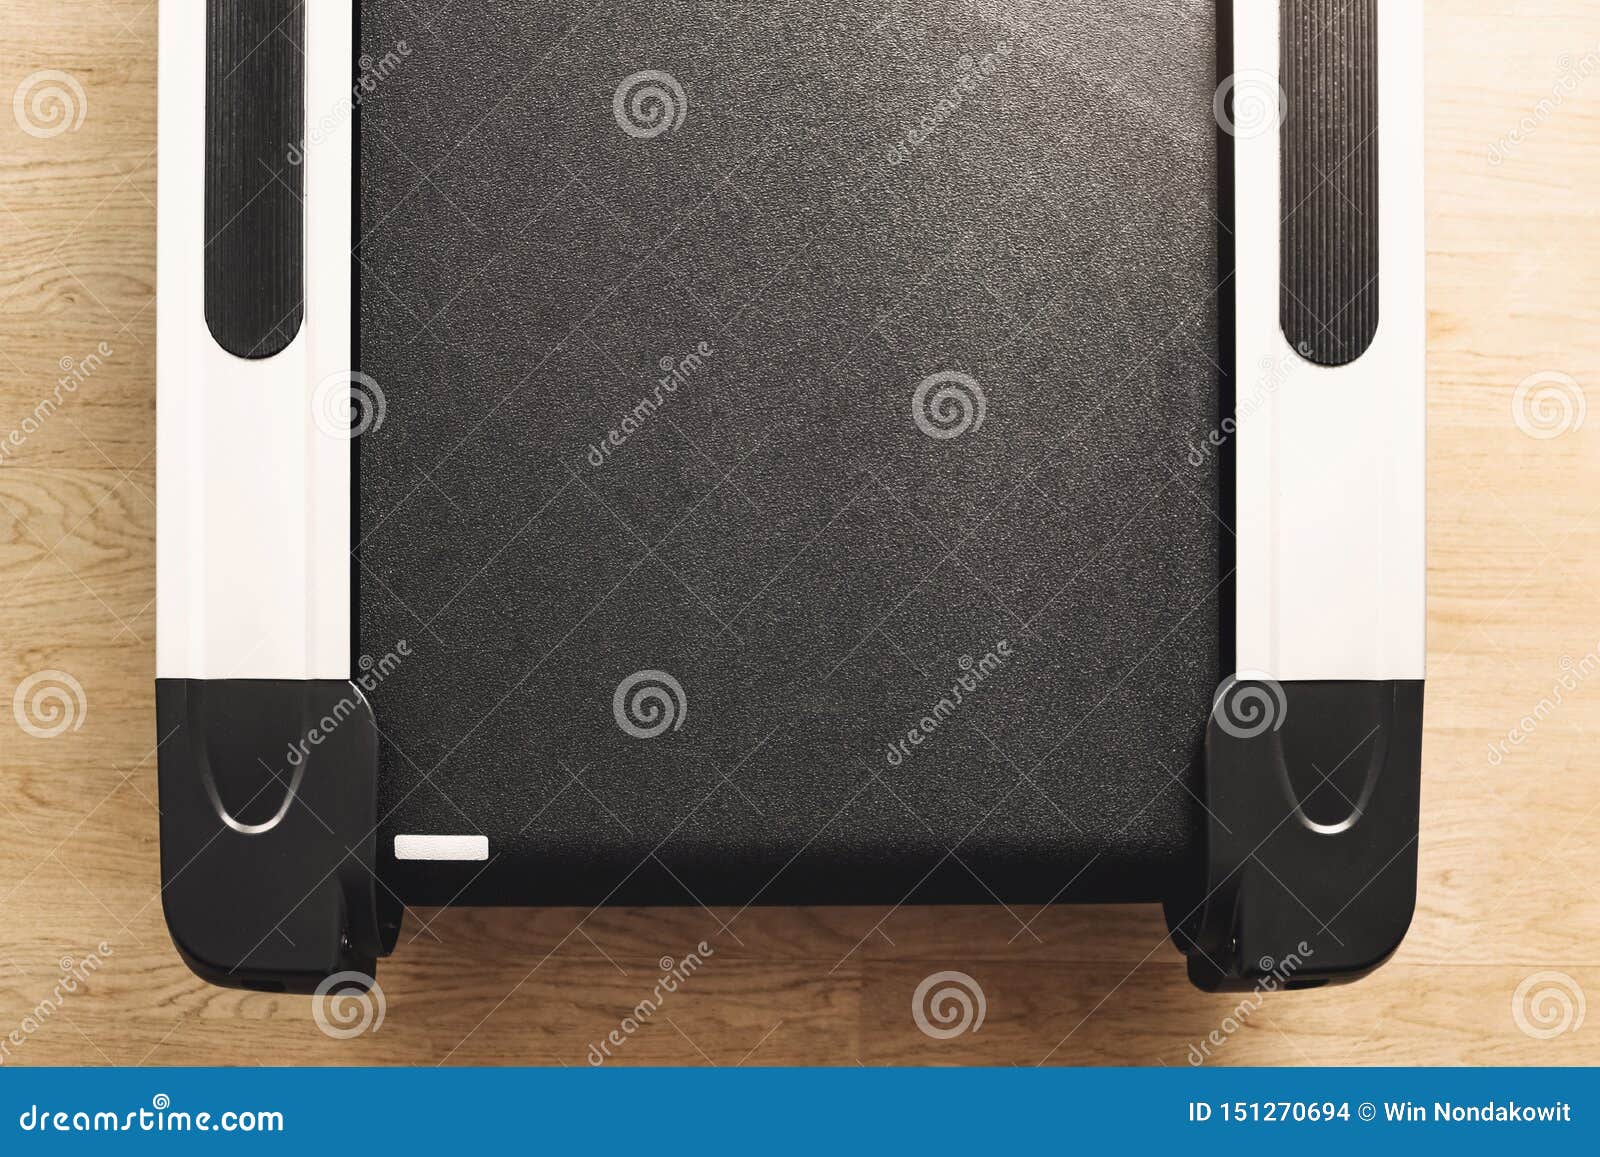 Top View Of Treadmill On Wooden Floor Stock Photo Image Of